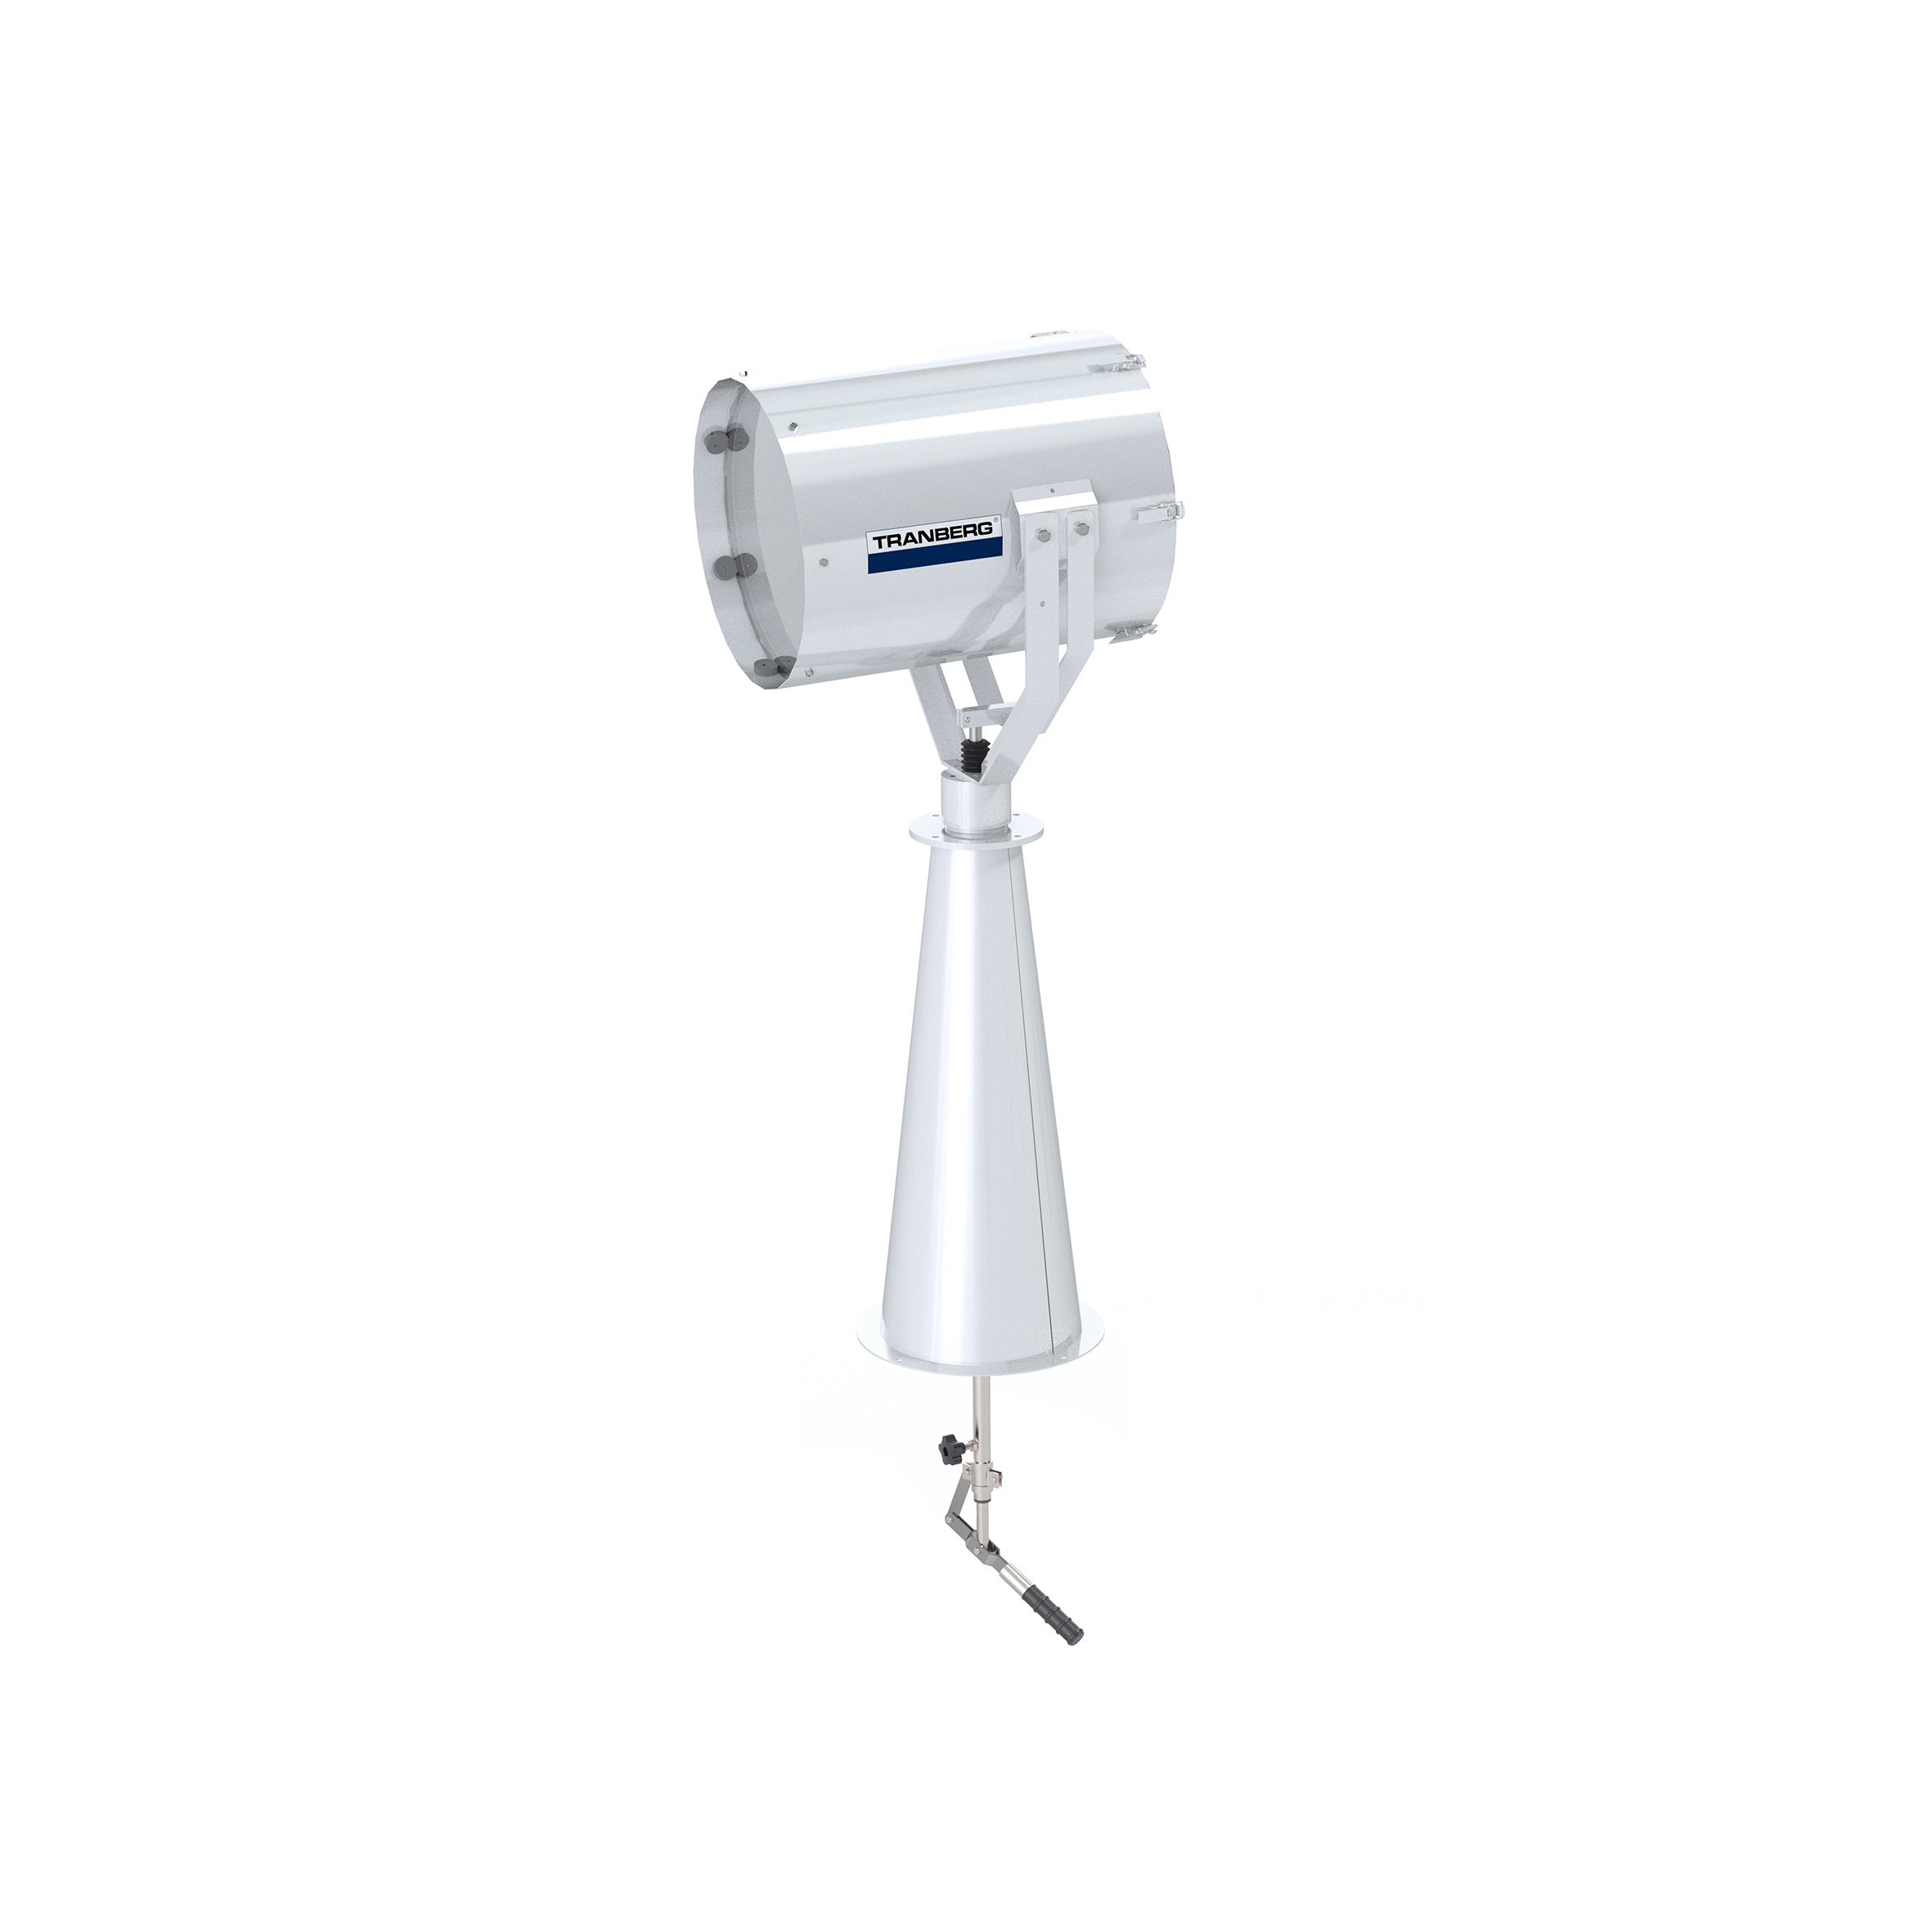 TEF 2630 Searchlight: Halogen 1000W bulb incl, 230V, Bridge Controlled, Stainless Steel, W/800 mm pe photo